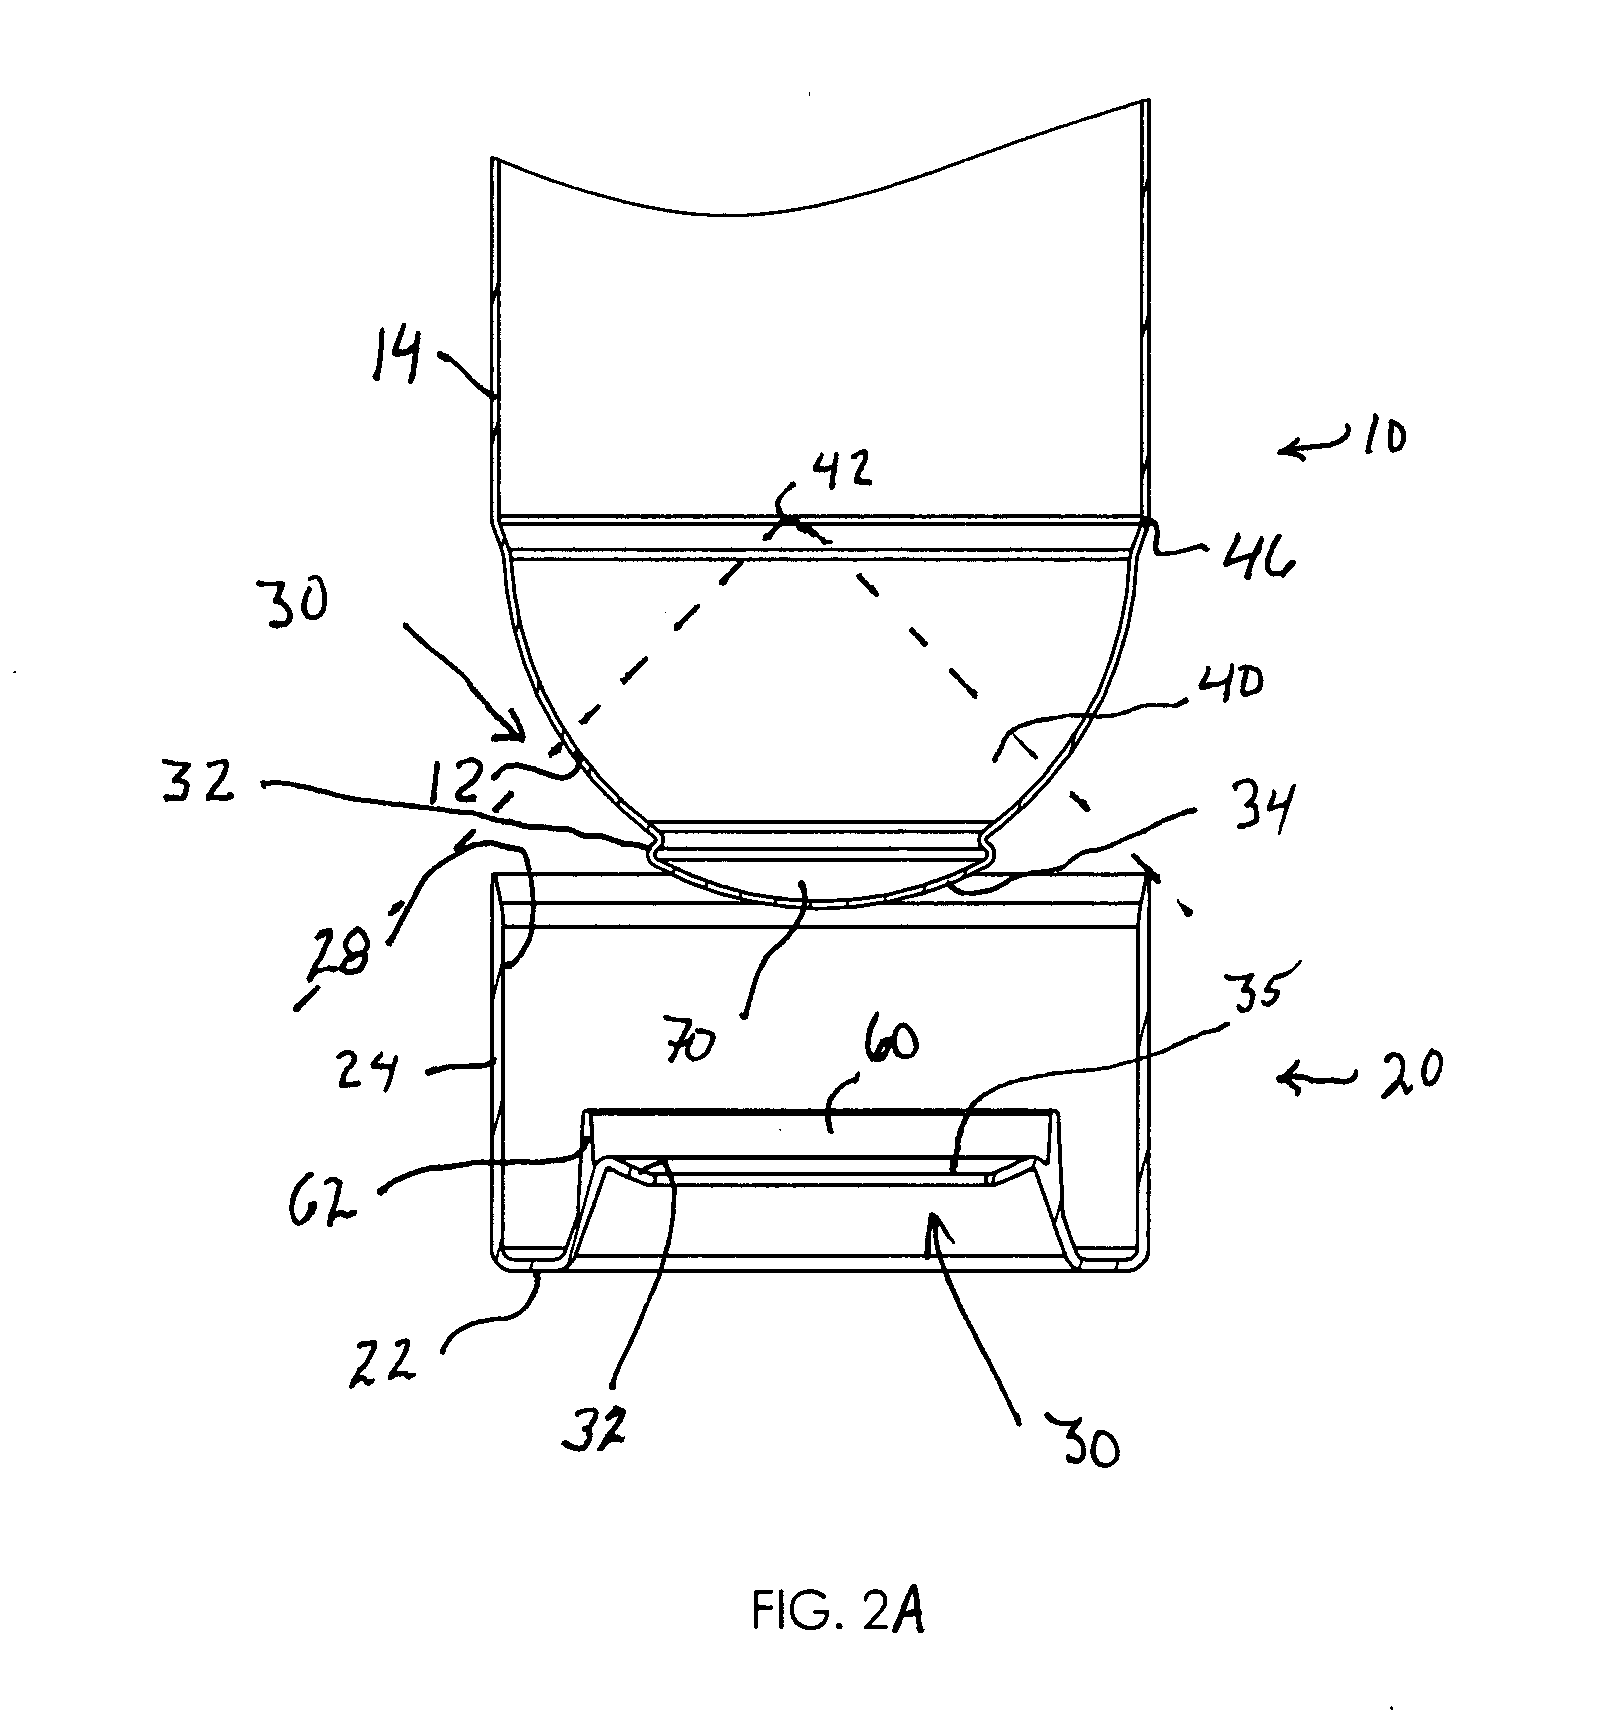 Supportable pressurizable container having a bottom for receiving a dip tube and base cup therefor